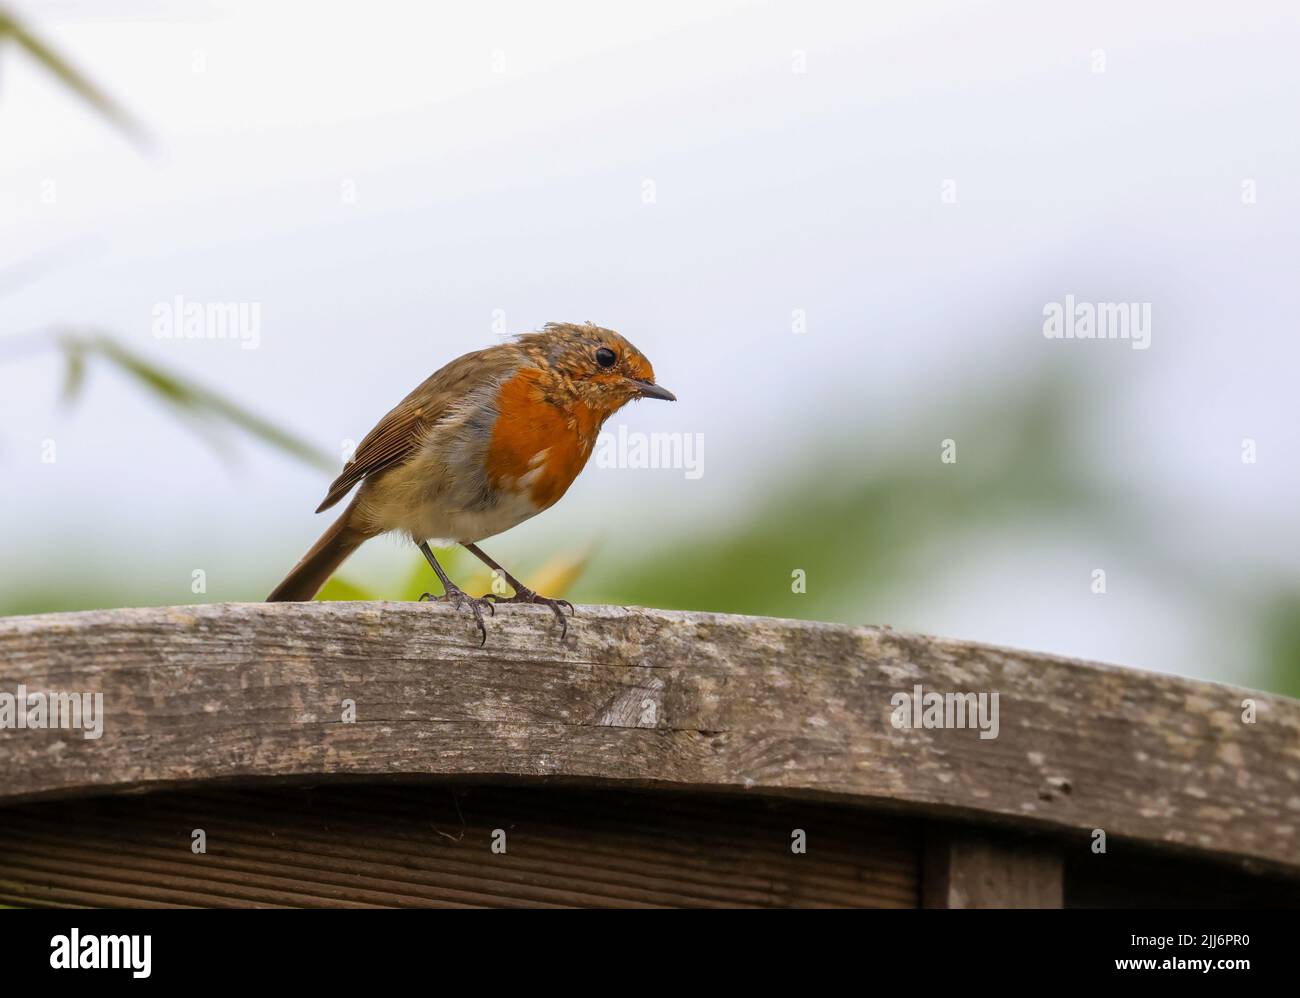 Juvenile European robin bird 'Erithacus rubecula' red orange breast feathers changing color, perched on garden fence. Dublin, Ireland Stock Photo